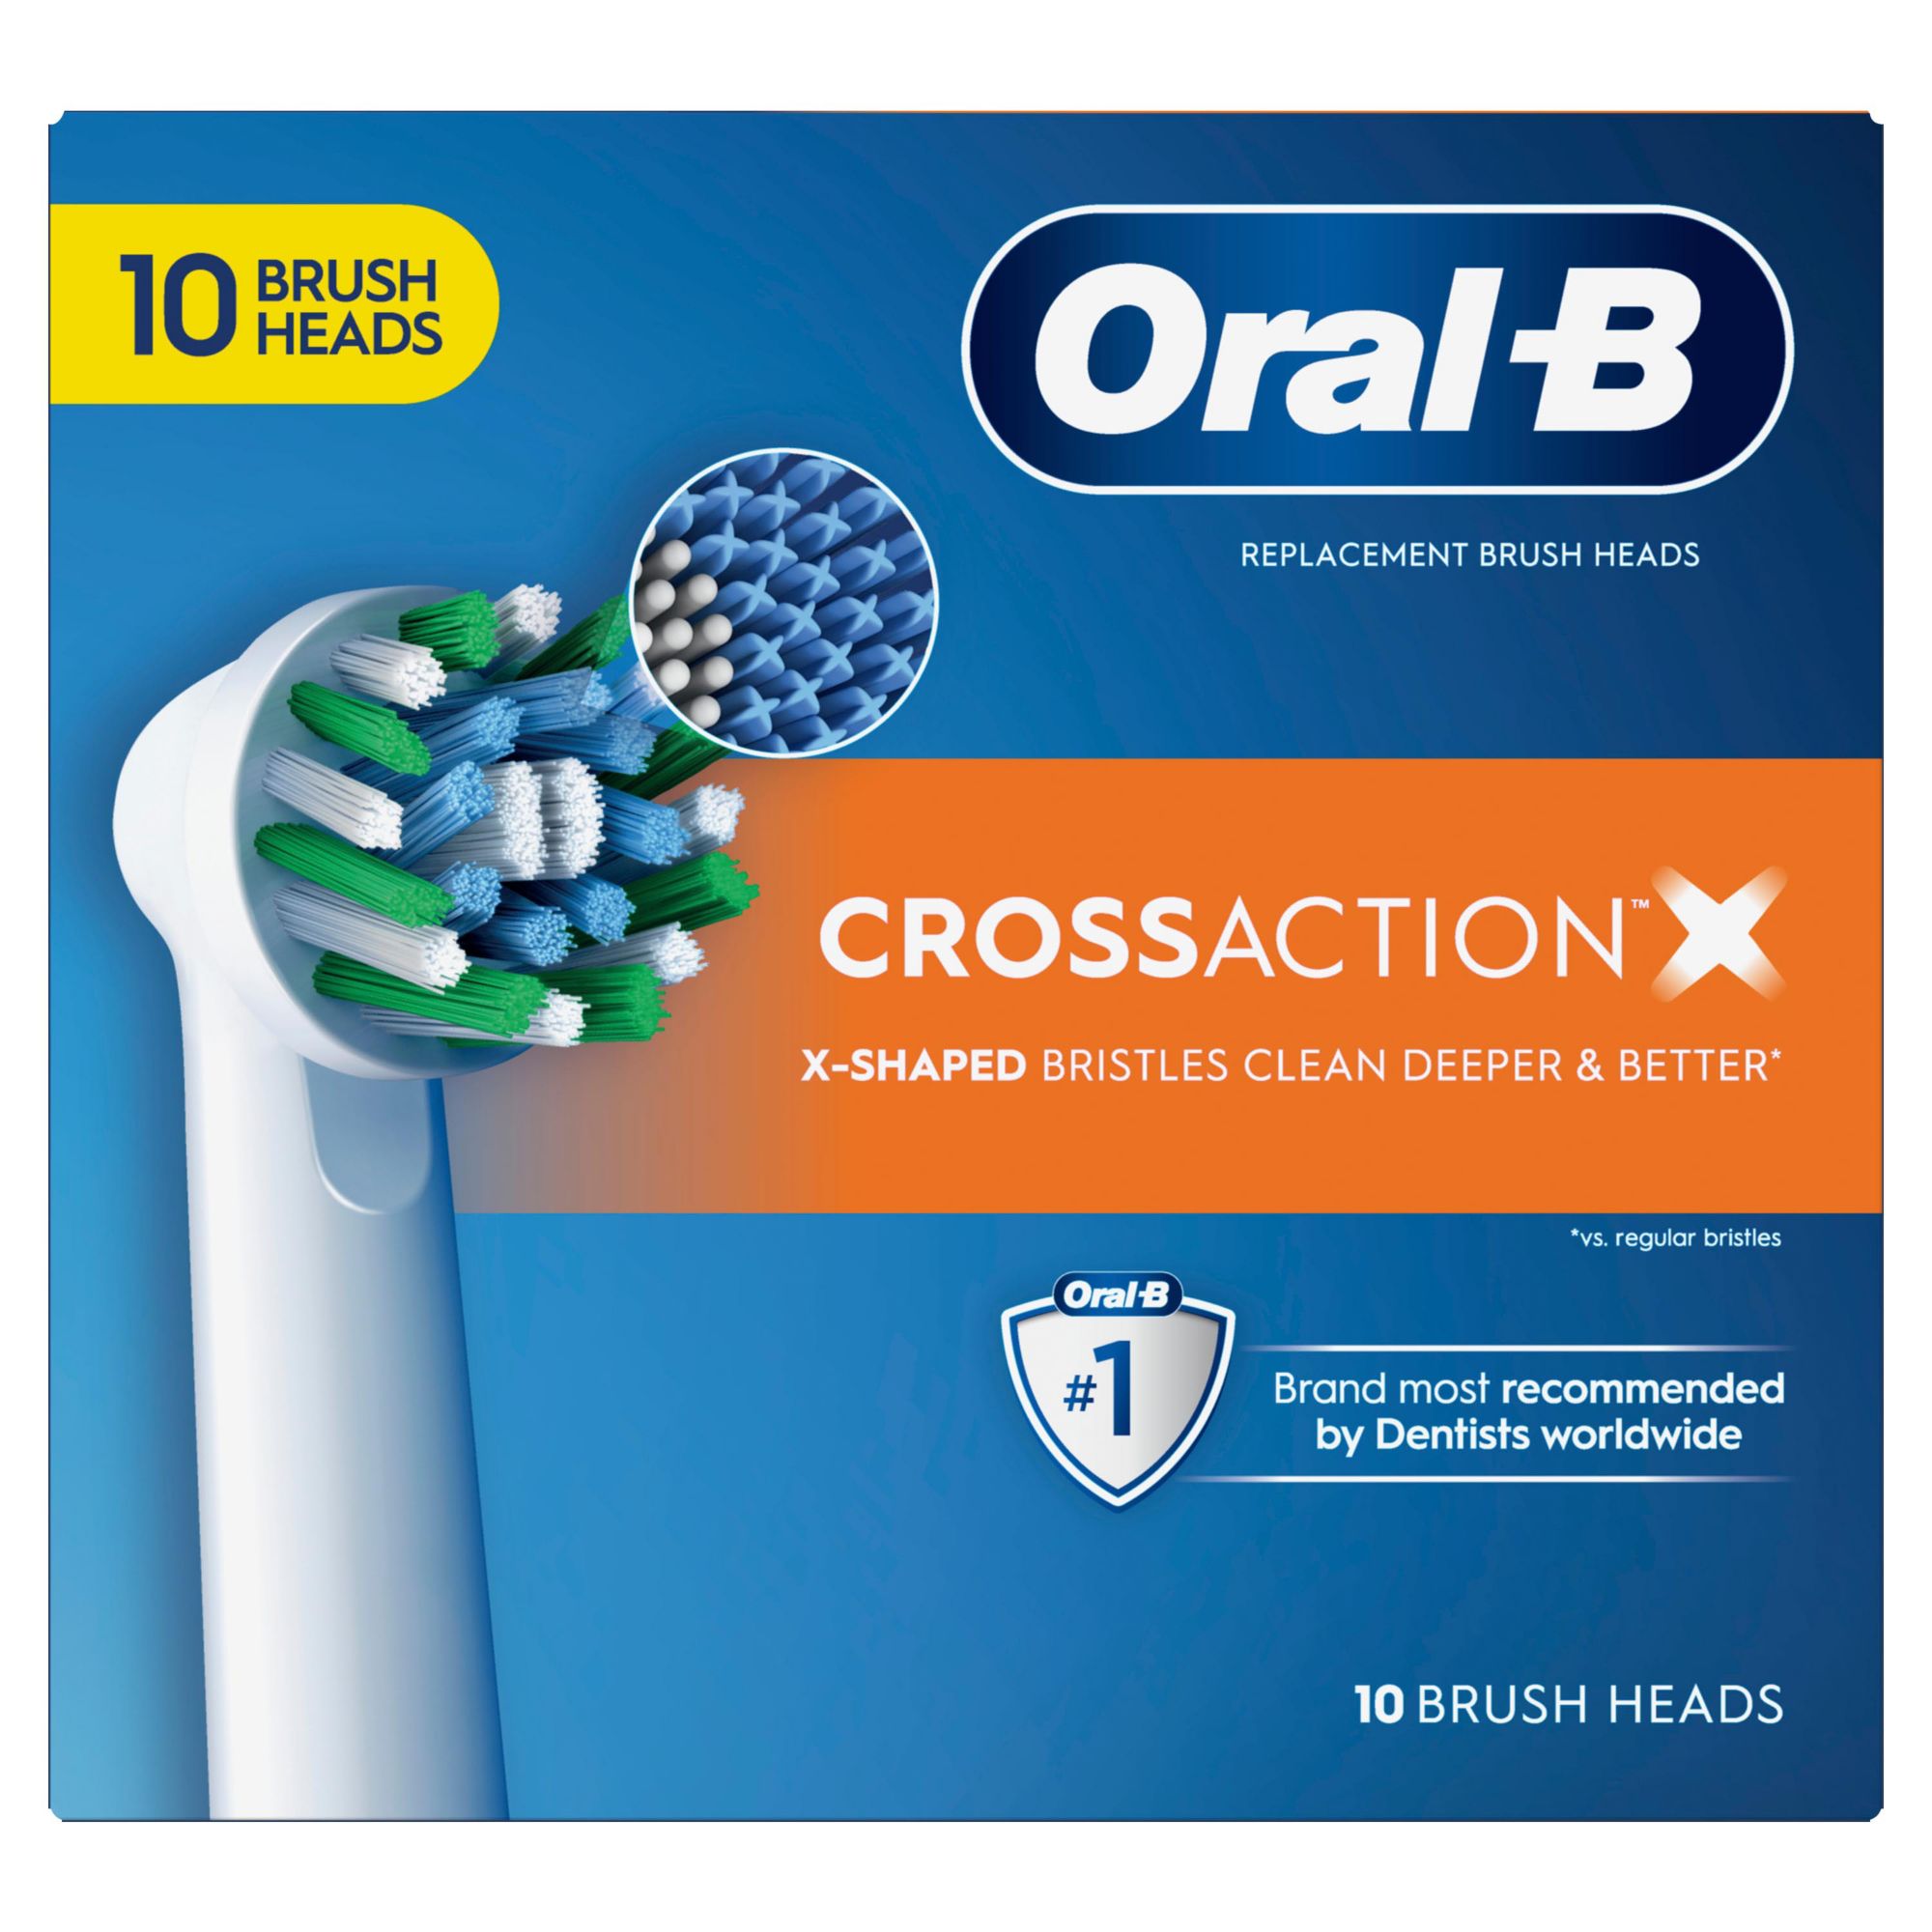 Oral-B iO Series 5 Electric Rechargeable Toothbrush with 3 Brush Head, in  White and Black, Dual Pack